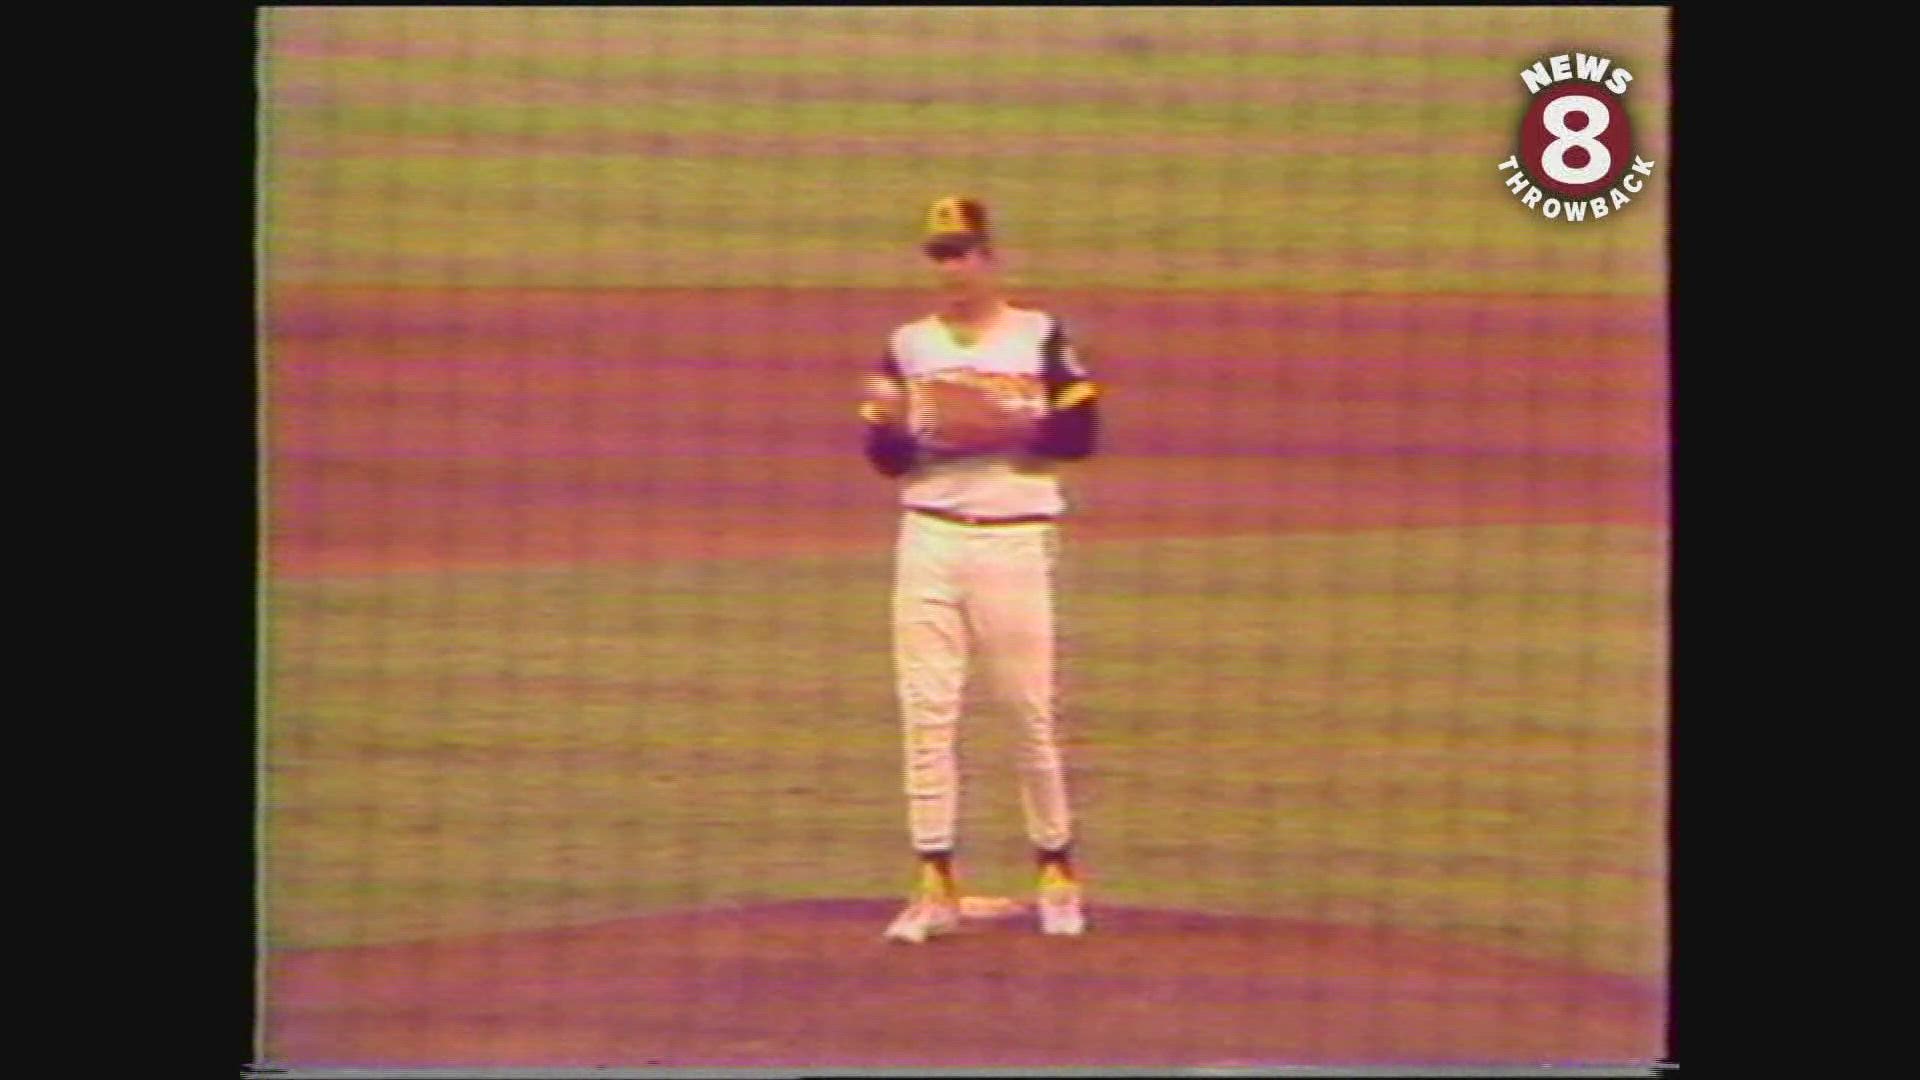 MLB Pitcher Gaylord Perry 1978 profile